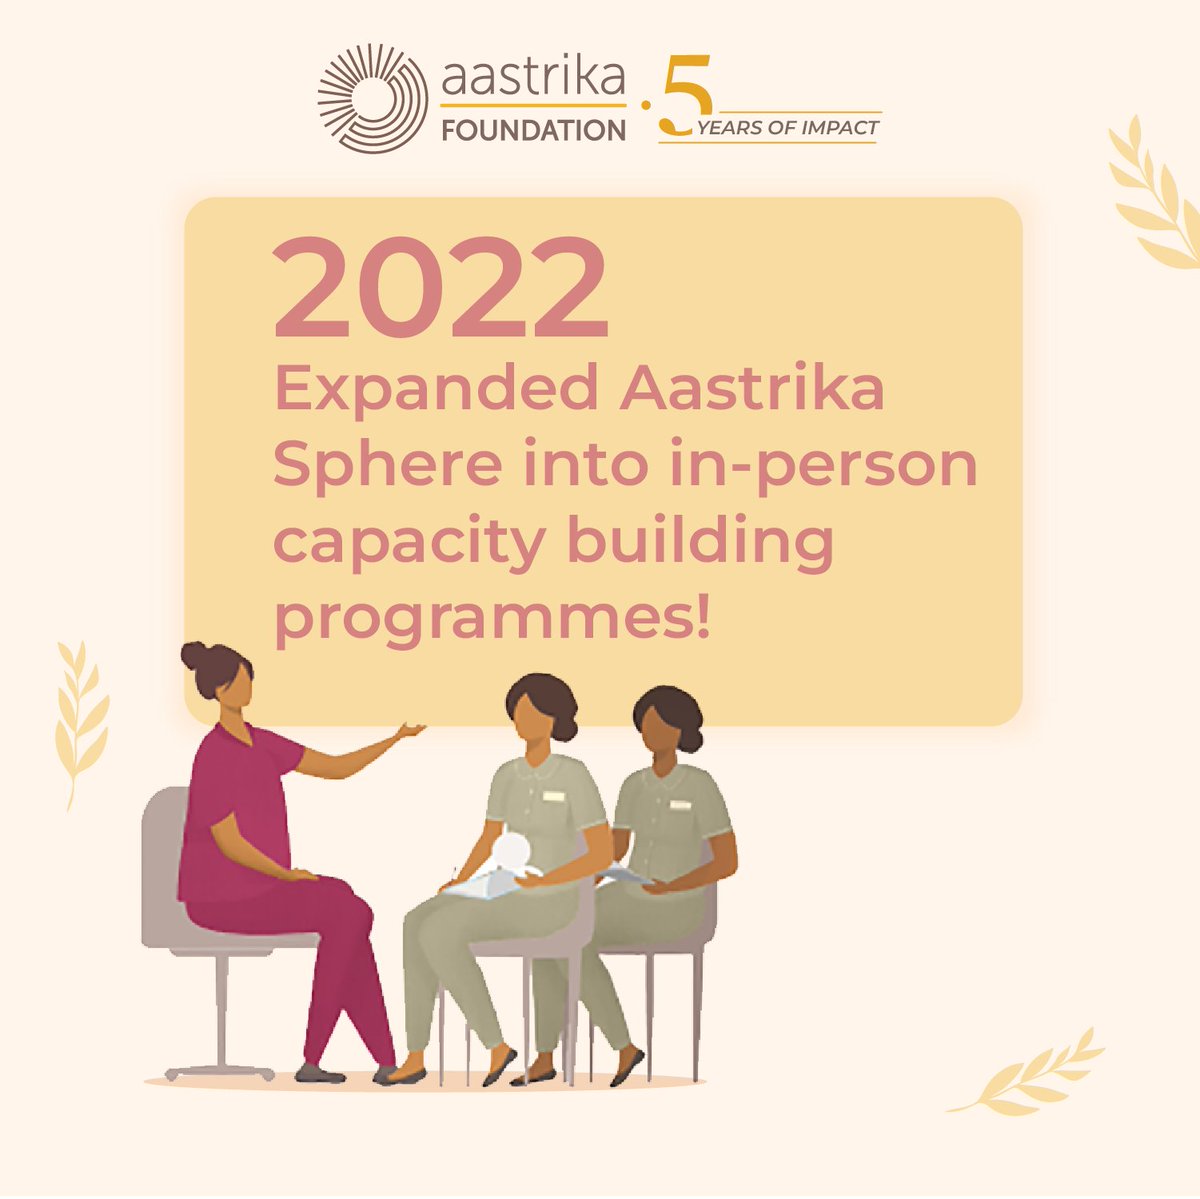 #Aastrika #AastrikaFoundation #RespectfulMaternityCare #ForEveryMother #midwife #midwifery #respectfulhealthcare #maternalhealthcare #motherandchild #maternitycare #dignity #consent #companionship #5YearsOfImpact #MaternalHealthNGO #MidwiferyMatters